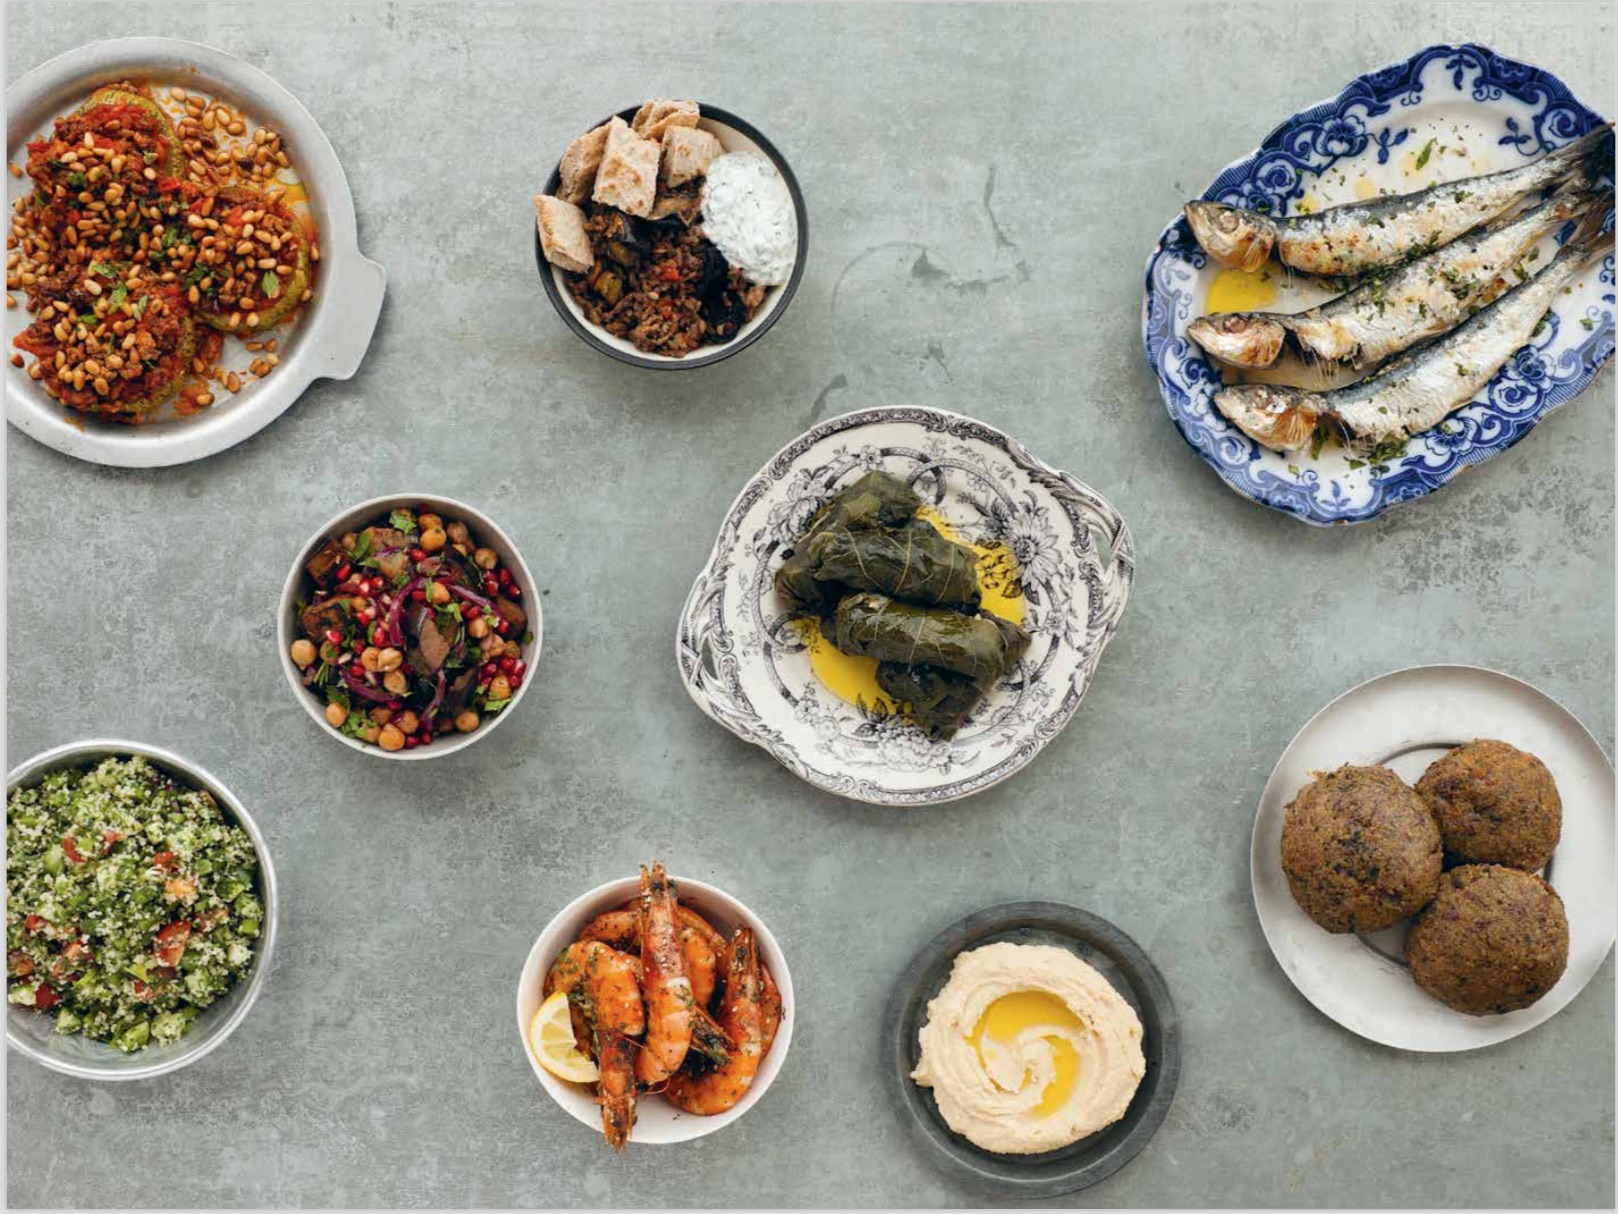 By Salma Hage from The Lebanese Cookbook copyright Phaidon 2019